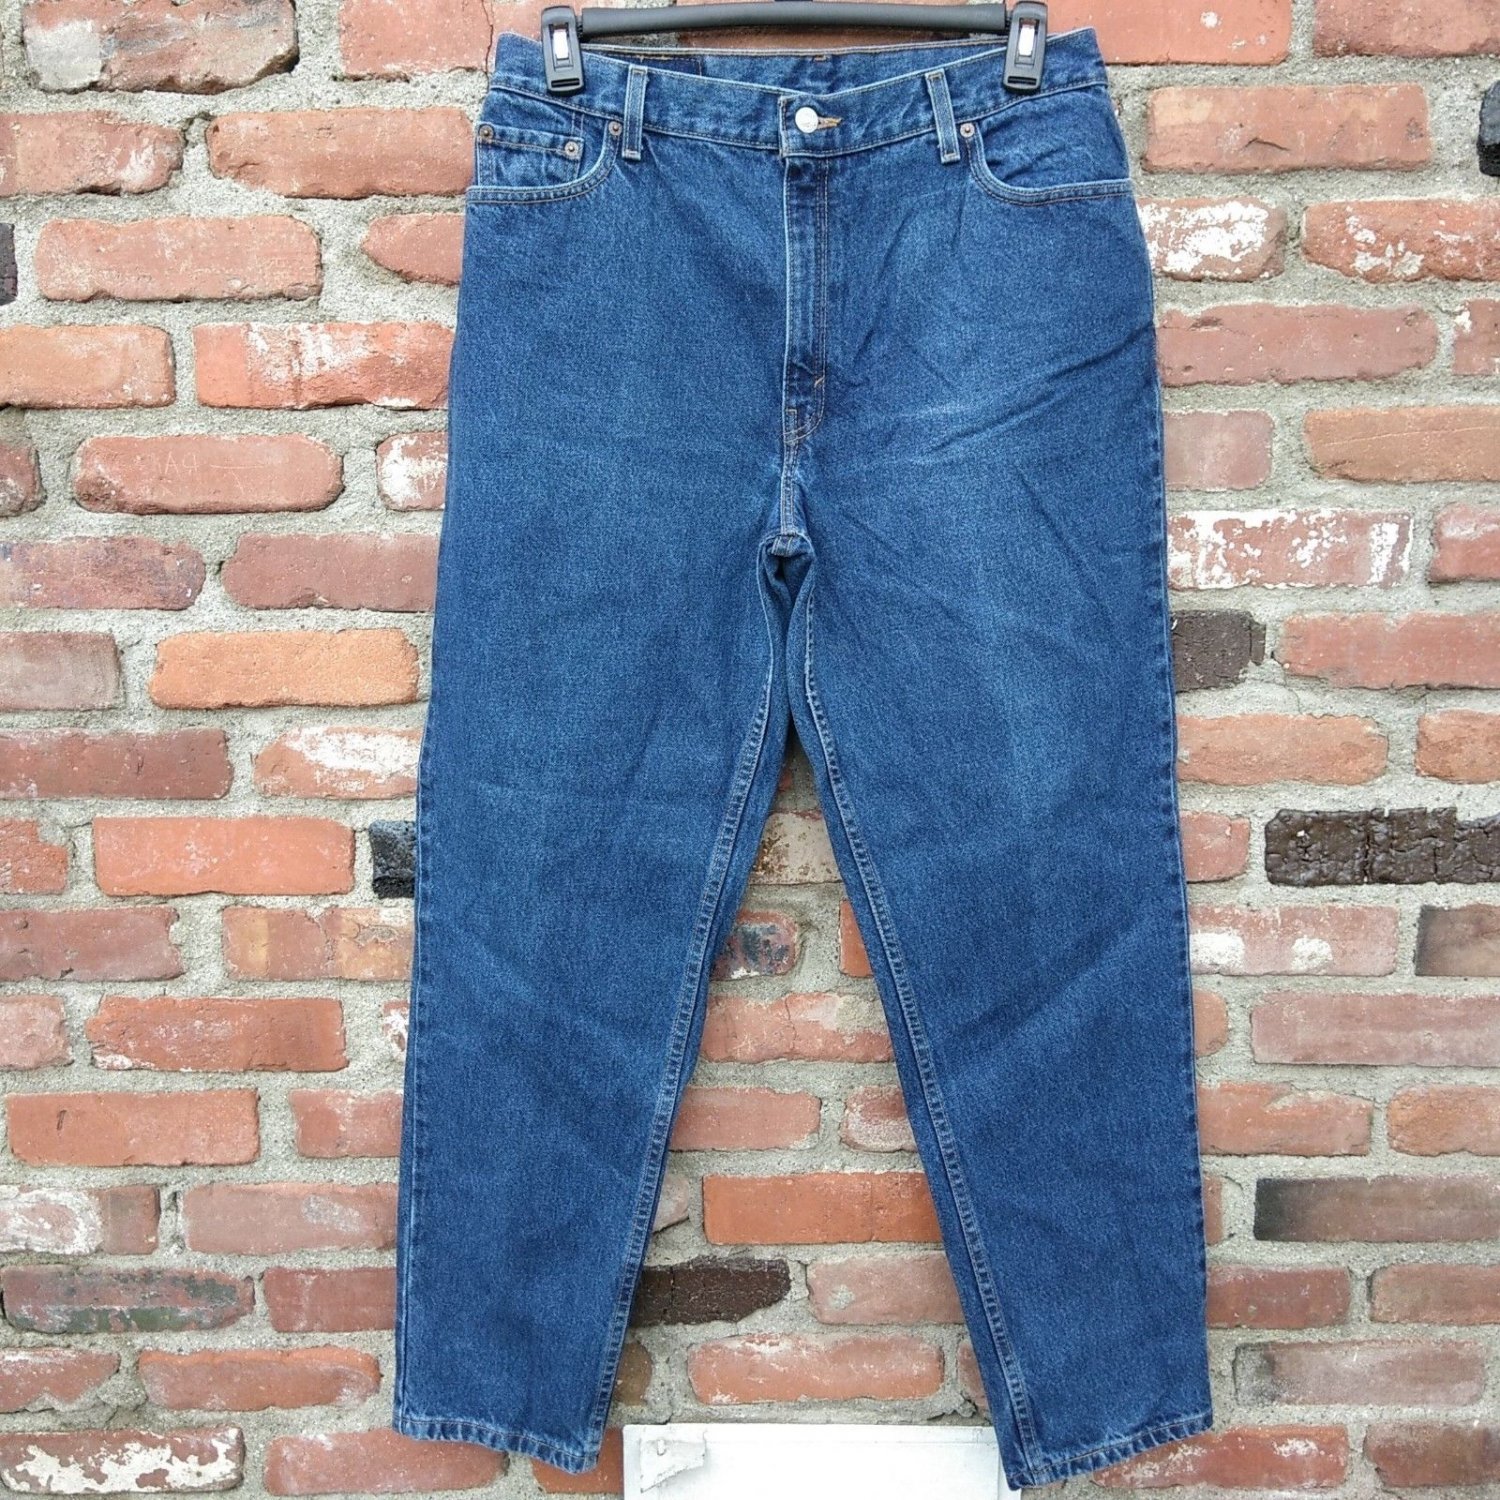 Vintage Levi's 550 Relaxed Fit Tapered Leg High Waist Women's Jeans